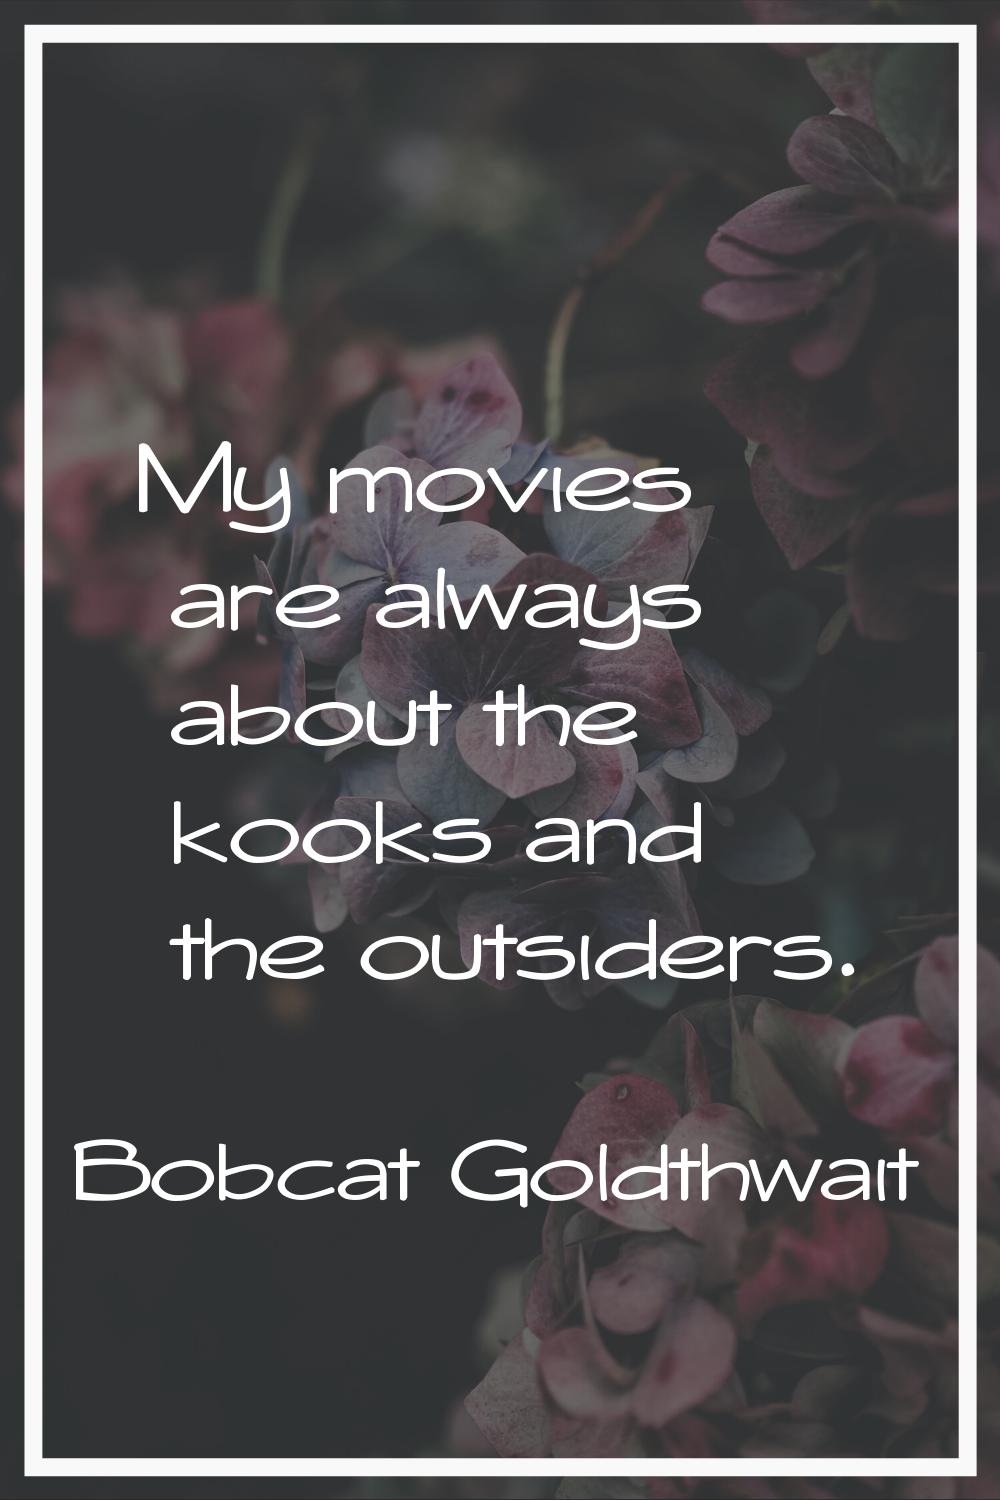 My movies are always about the kooks and the outsiders.